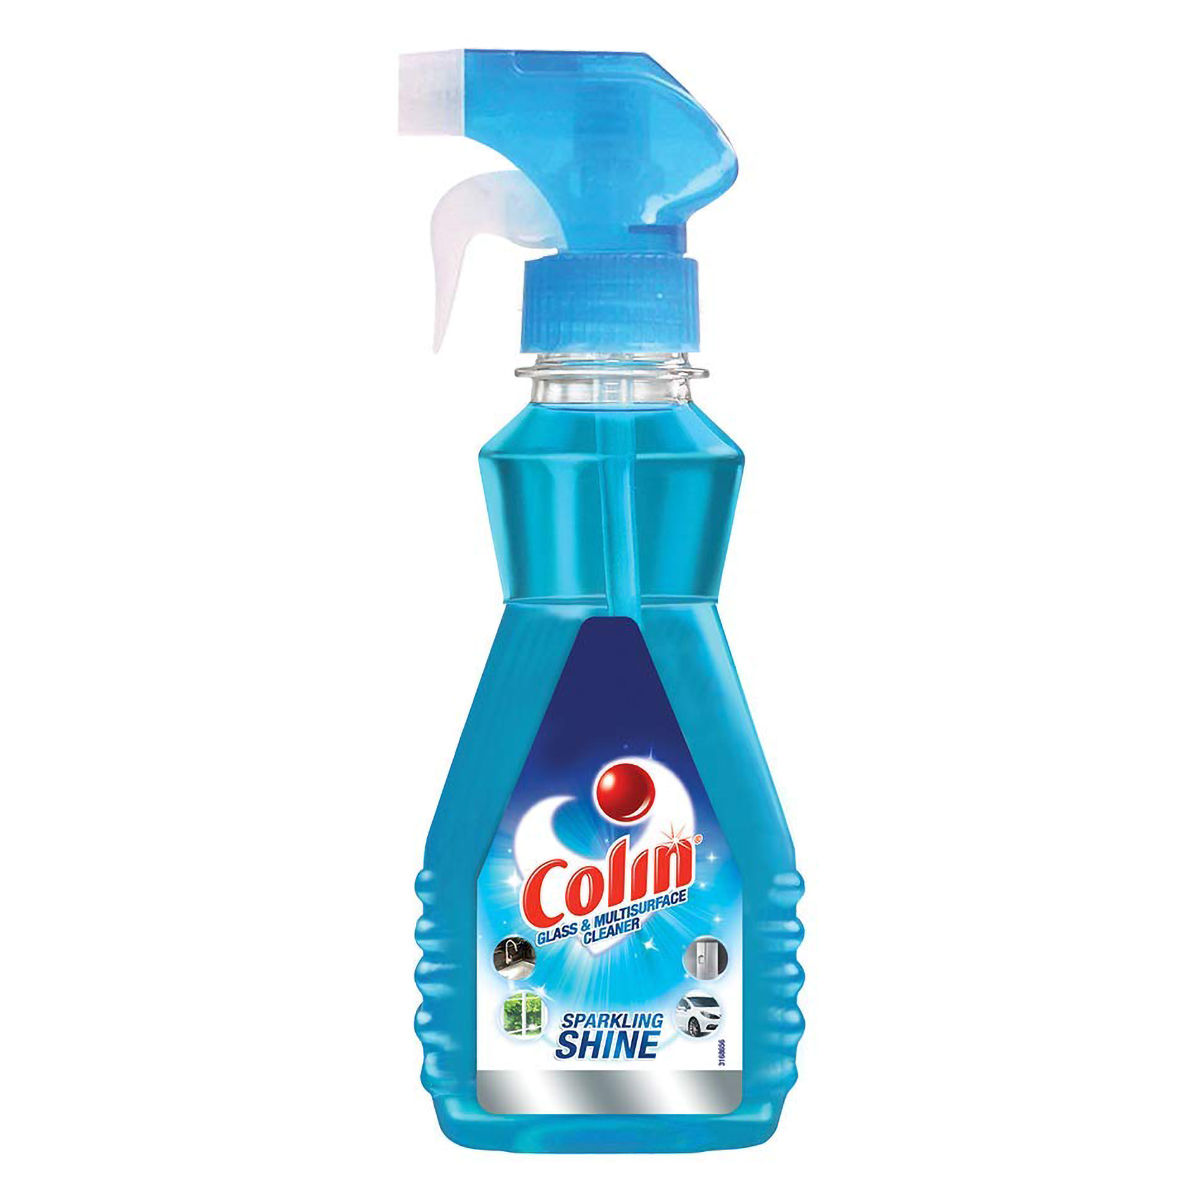 Buy Colin Glass Cleaner, 250 ml Online